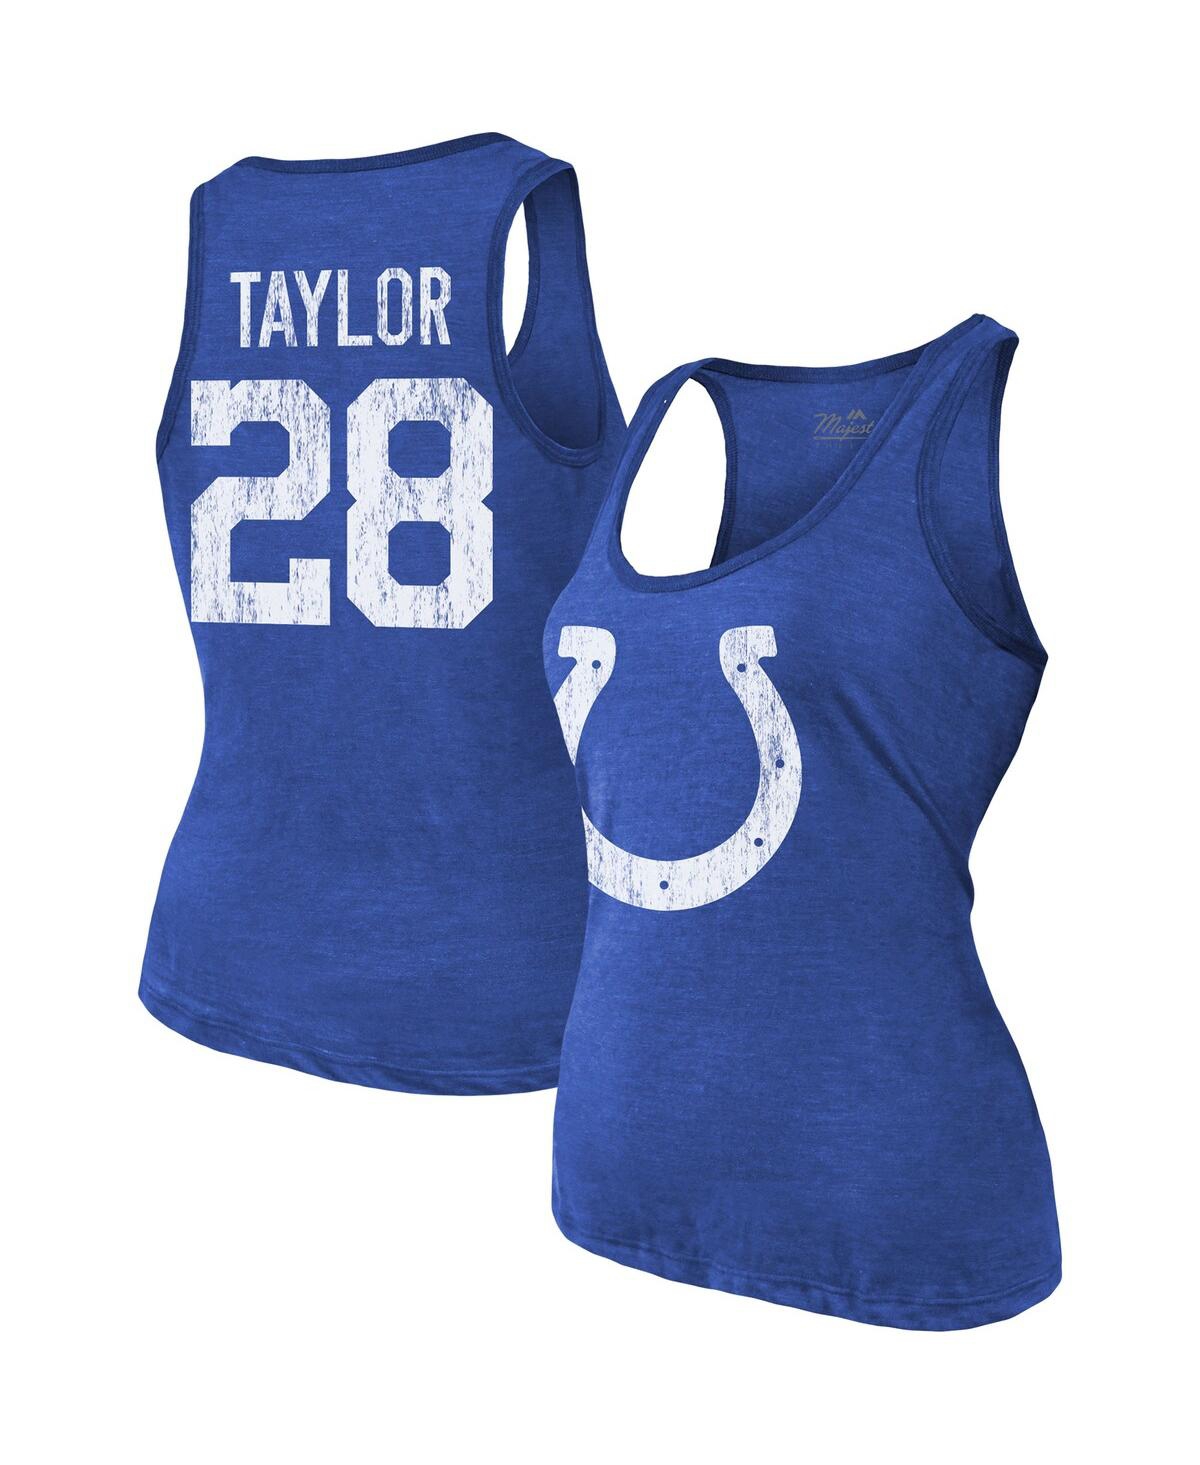 Women's Majestic Threads Jonathan Taylor Royal Indianapolis Colts Player Name and Number Tri-Blend Tank Top - Royal